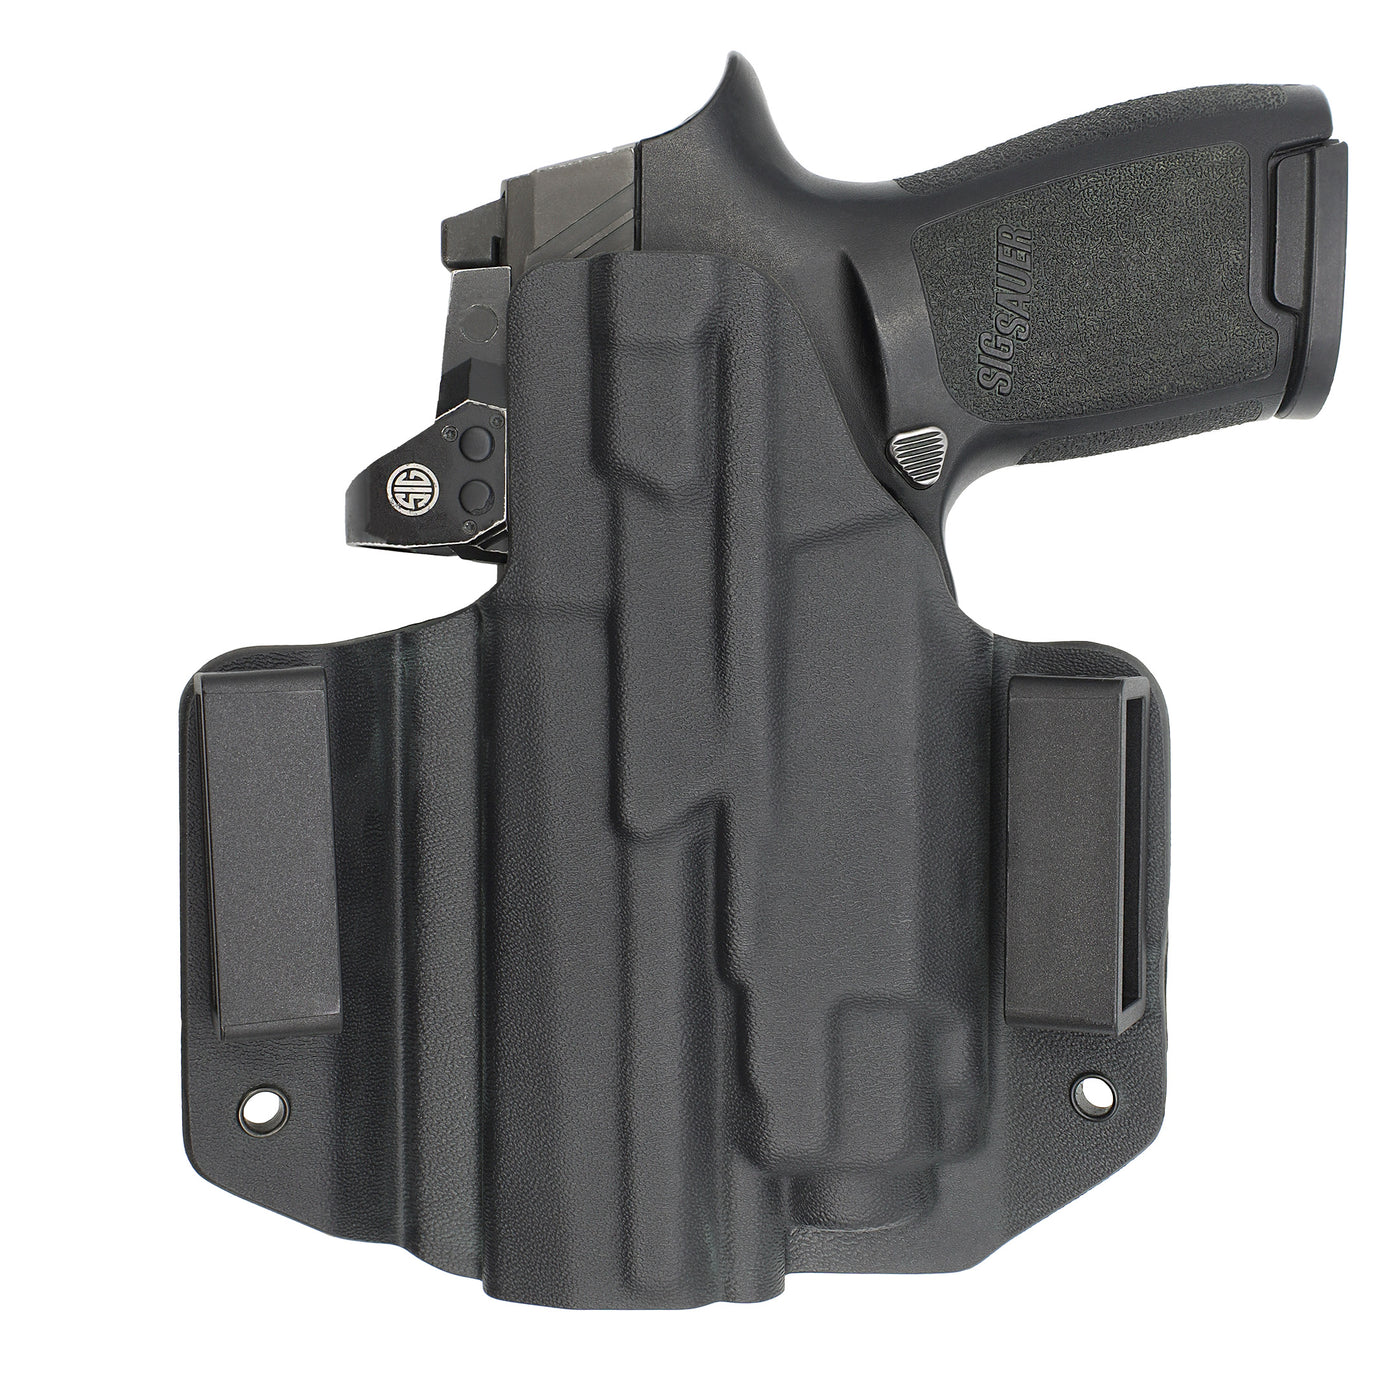 C&G Holsters custom OWB Tactical SIG P320 streamlight TLR8 holstered back view